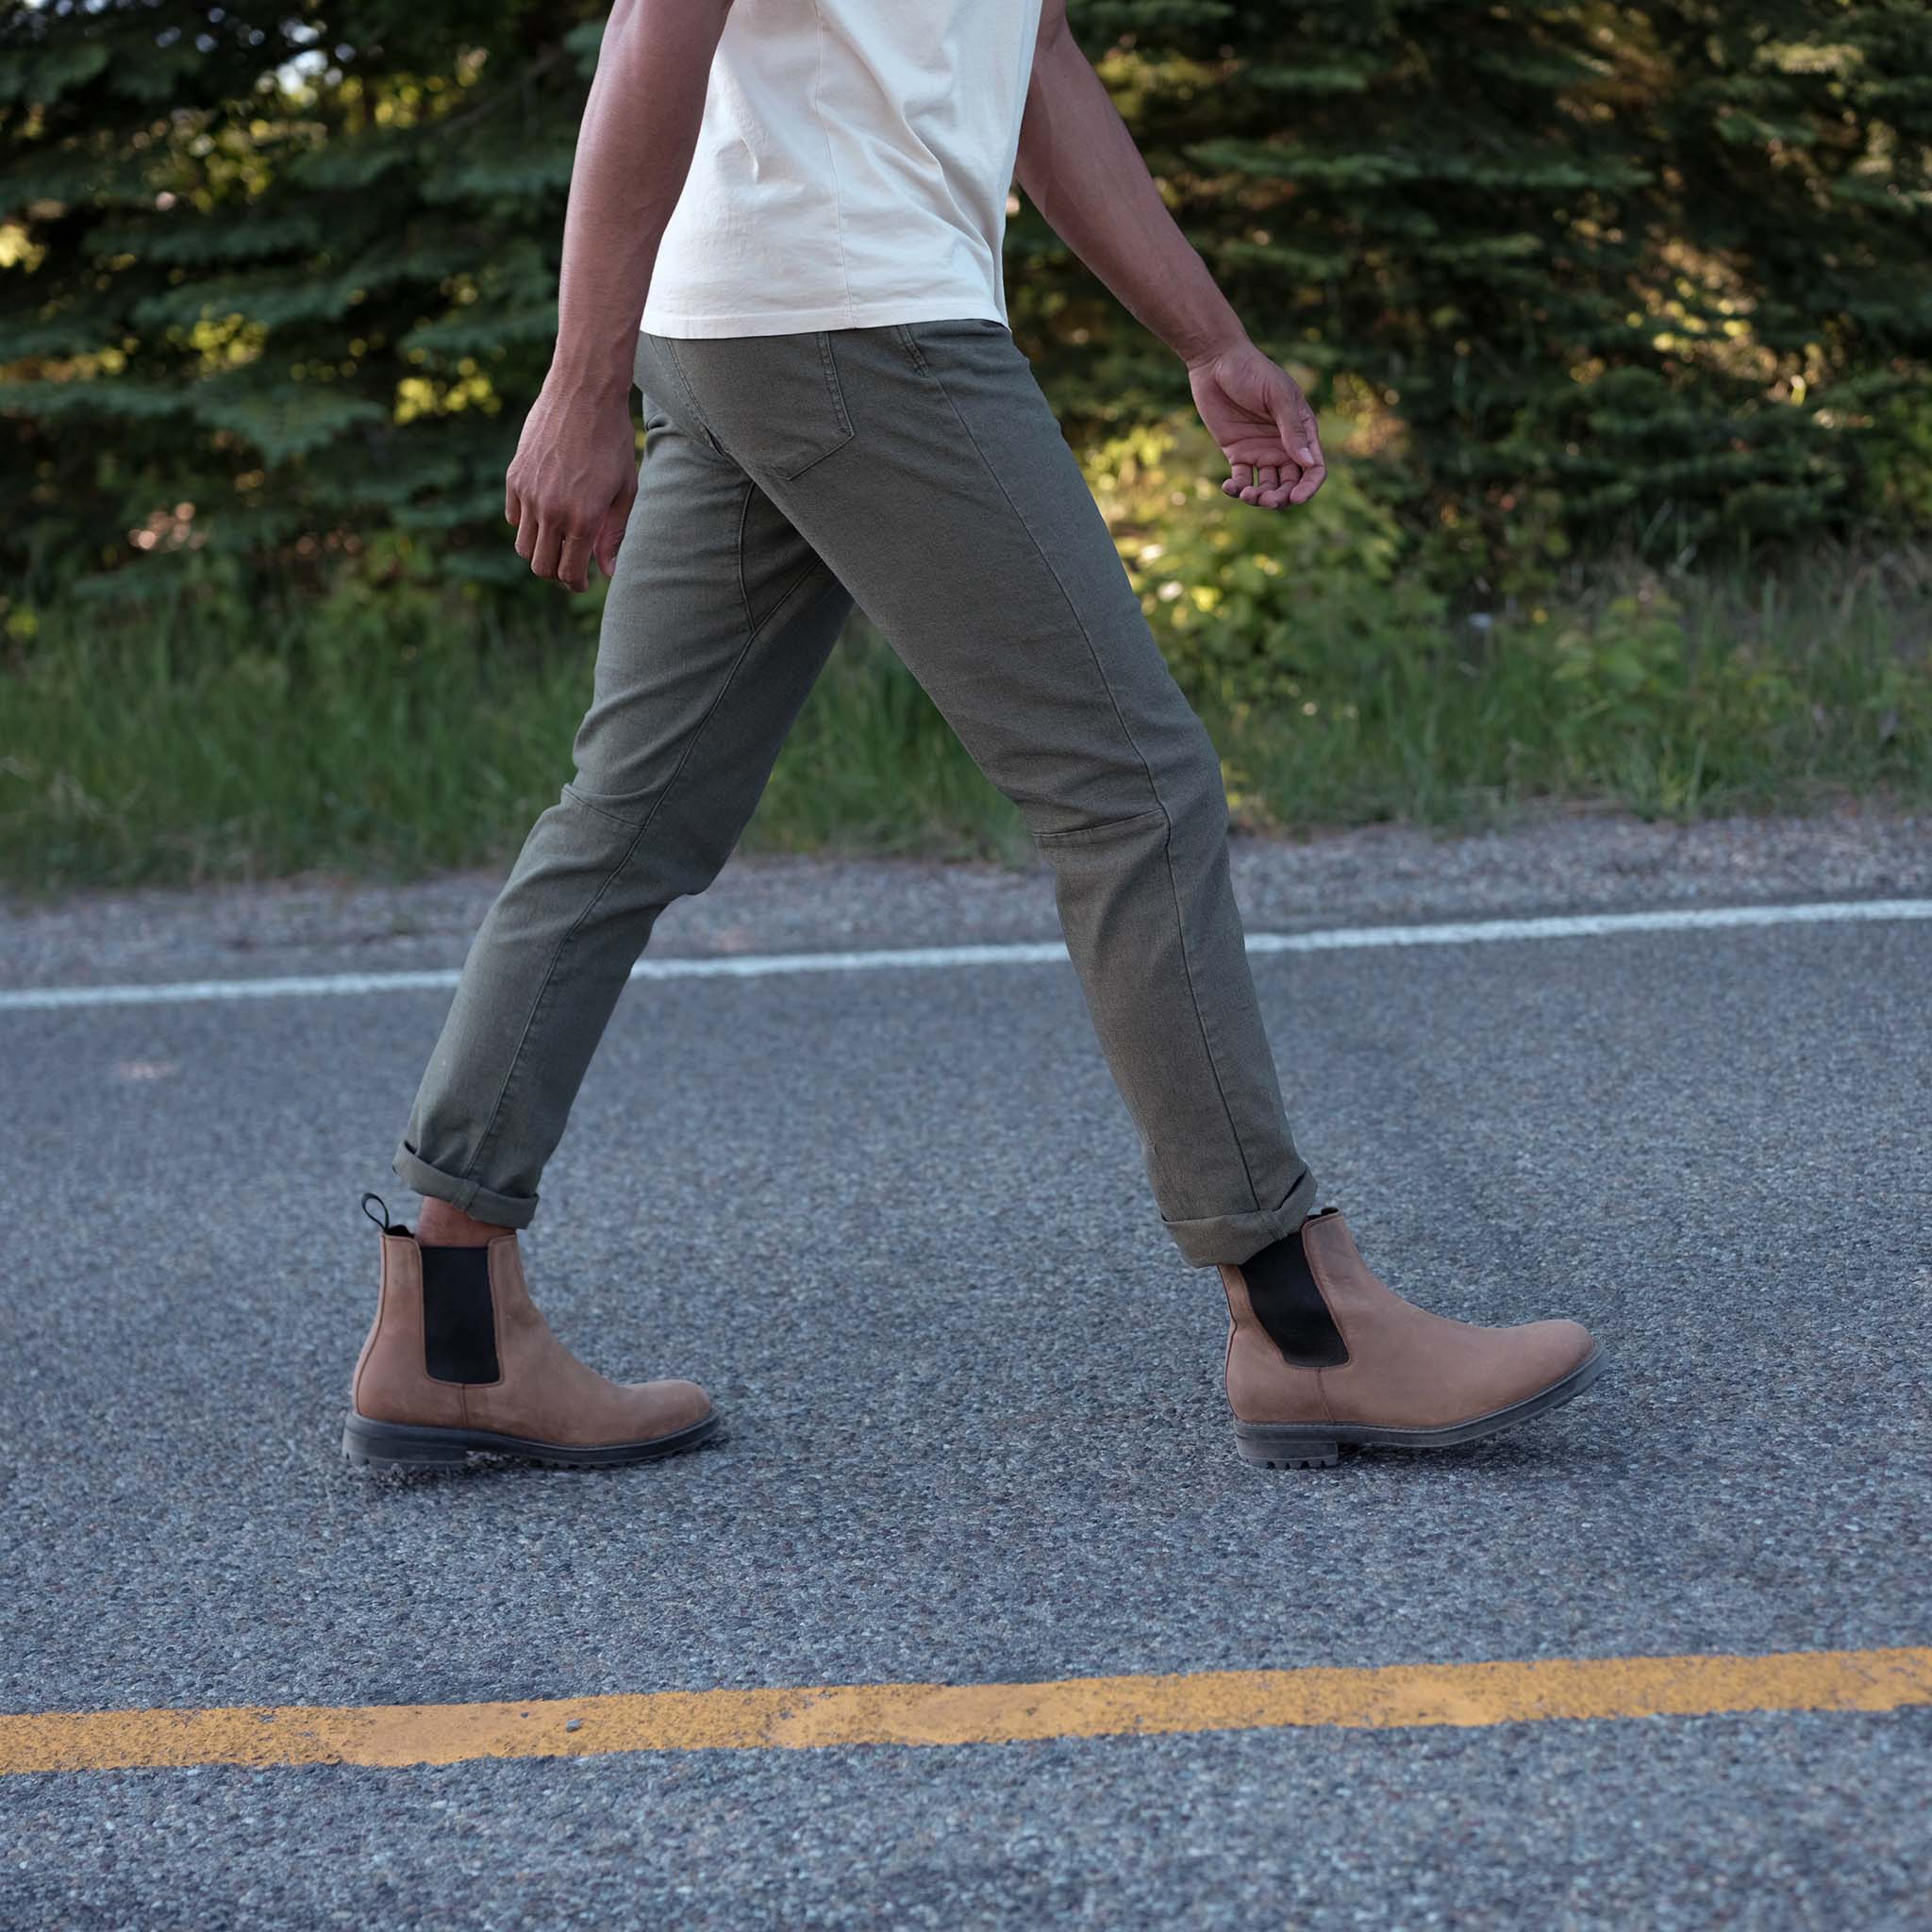 Image 2 of the Daytripper Chelsea Boot Tobacco on model